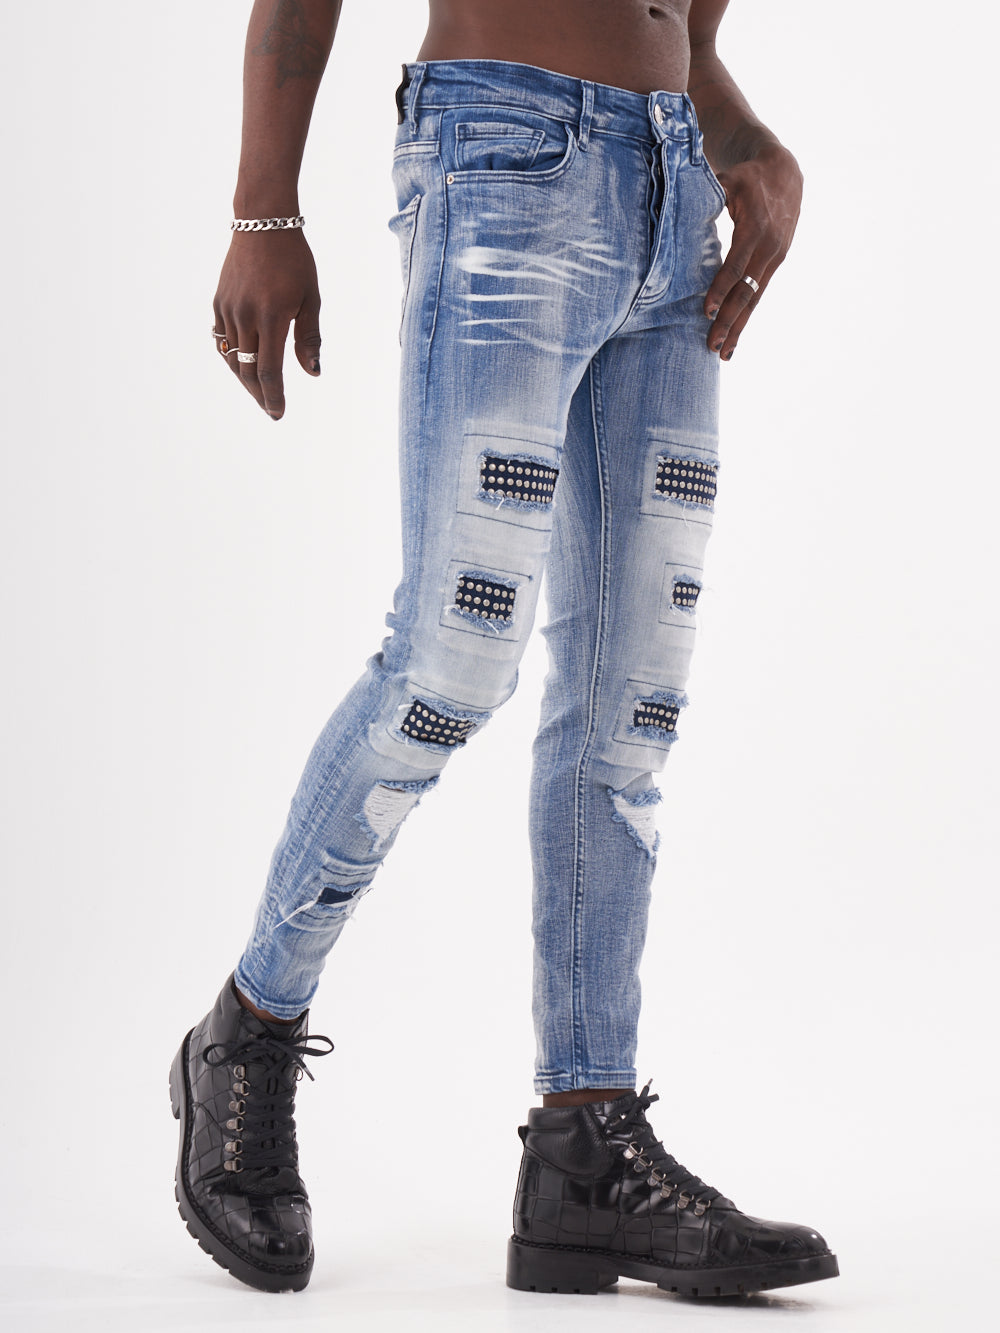 A man wearing MUTANT ripped jeans and a t - shirt.